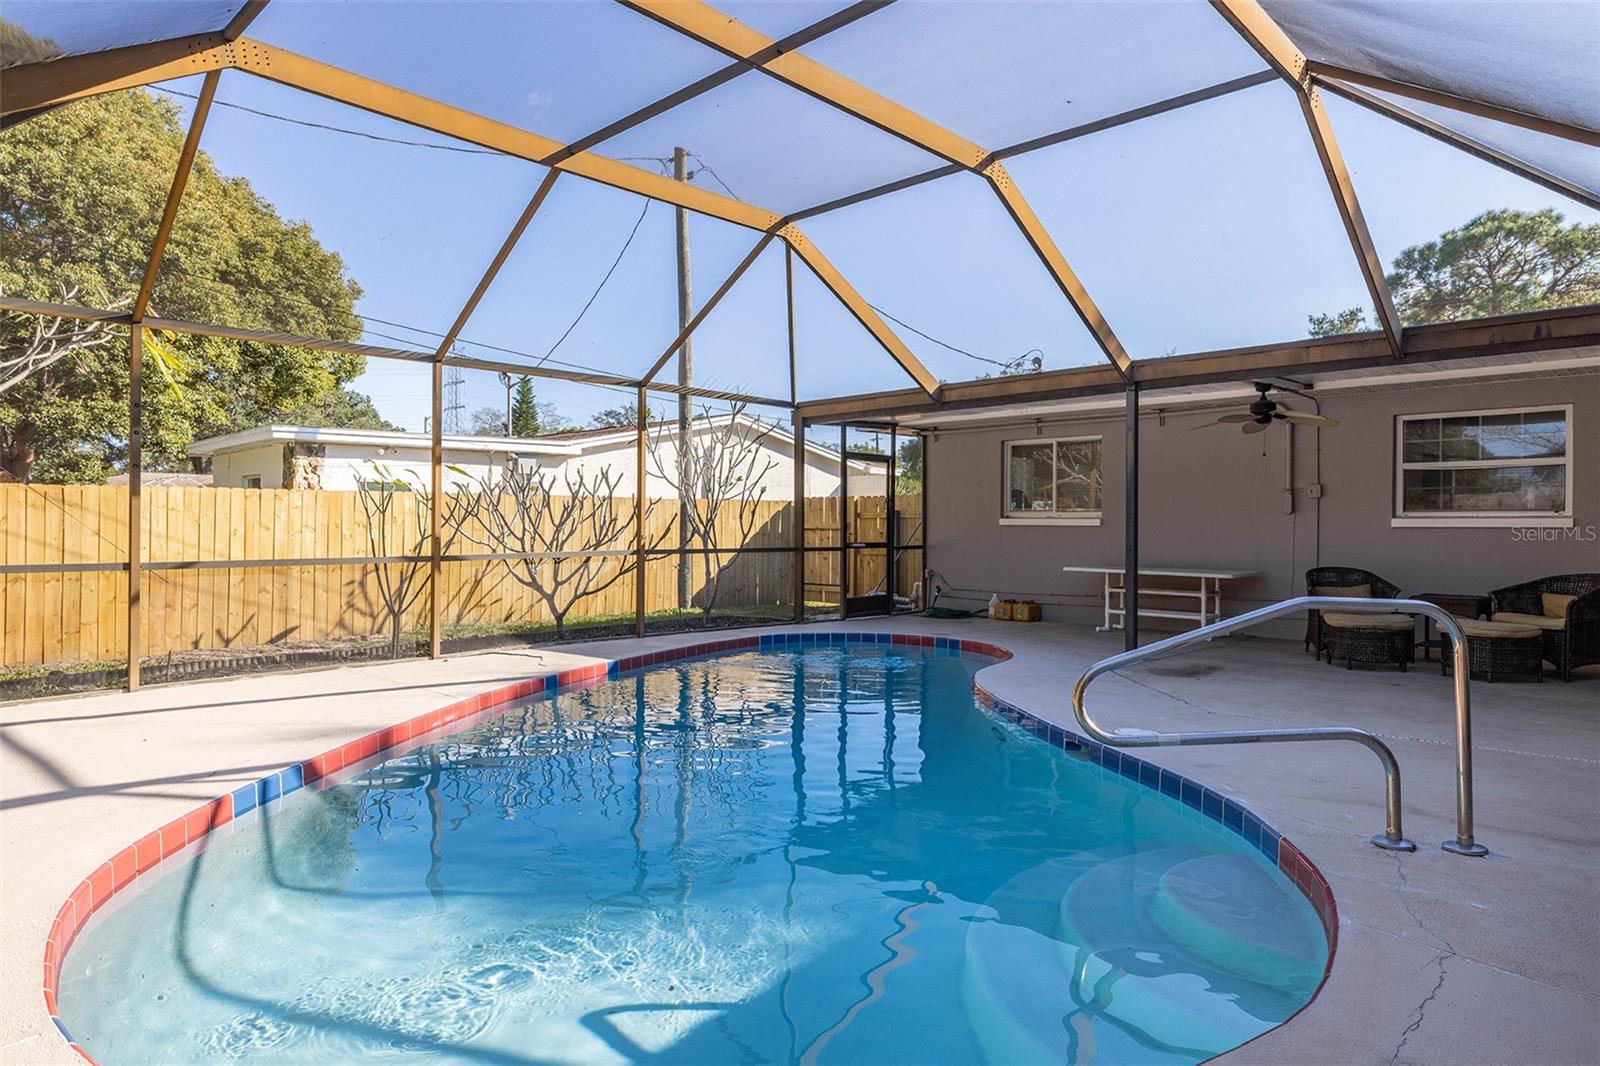 Private screened in pool with covered lanai